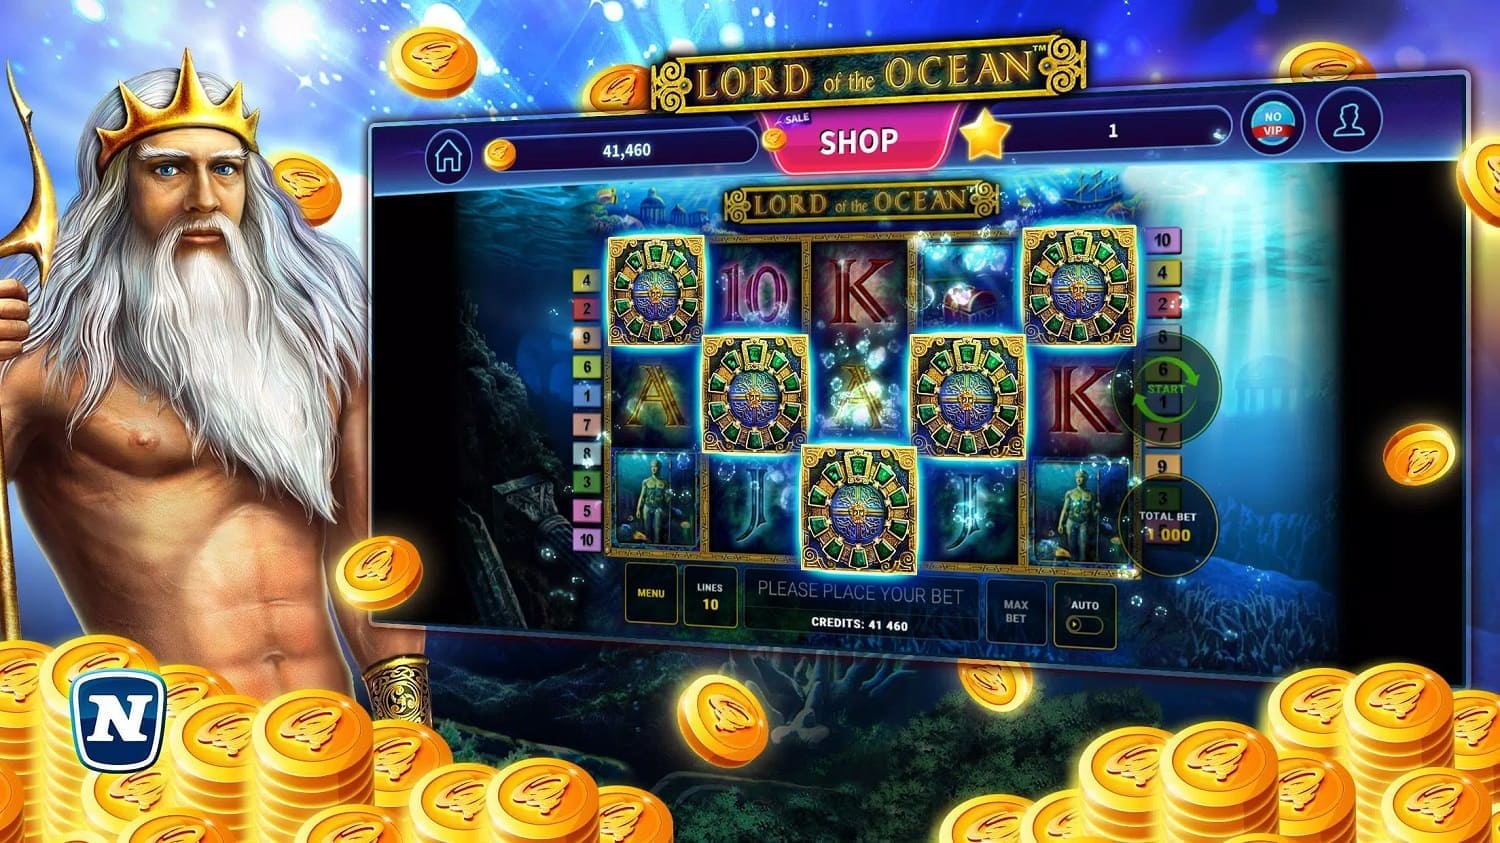 Lord of the Ocean slot machine online – Play now for free!